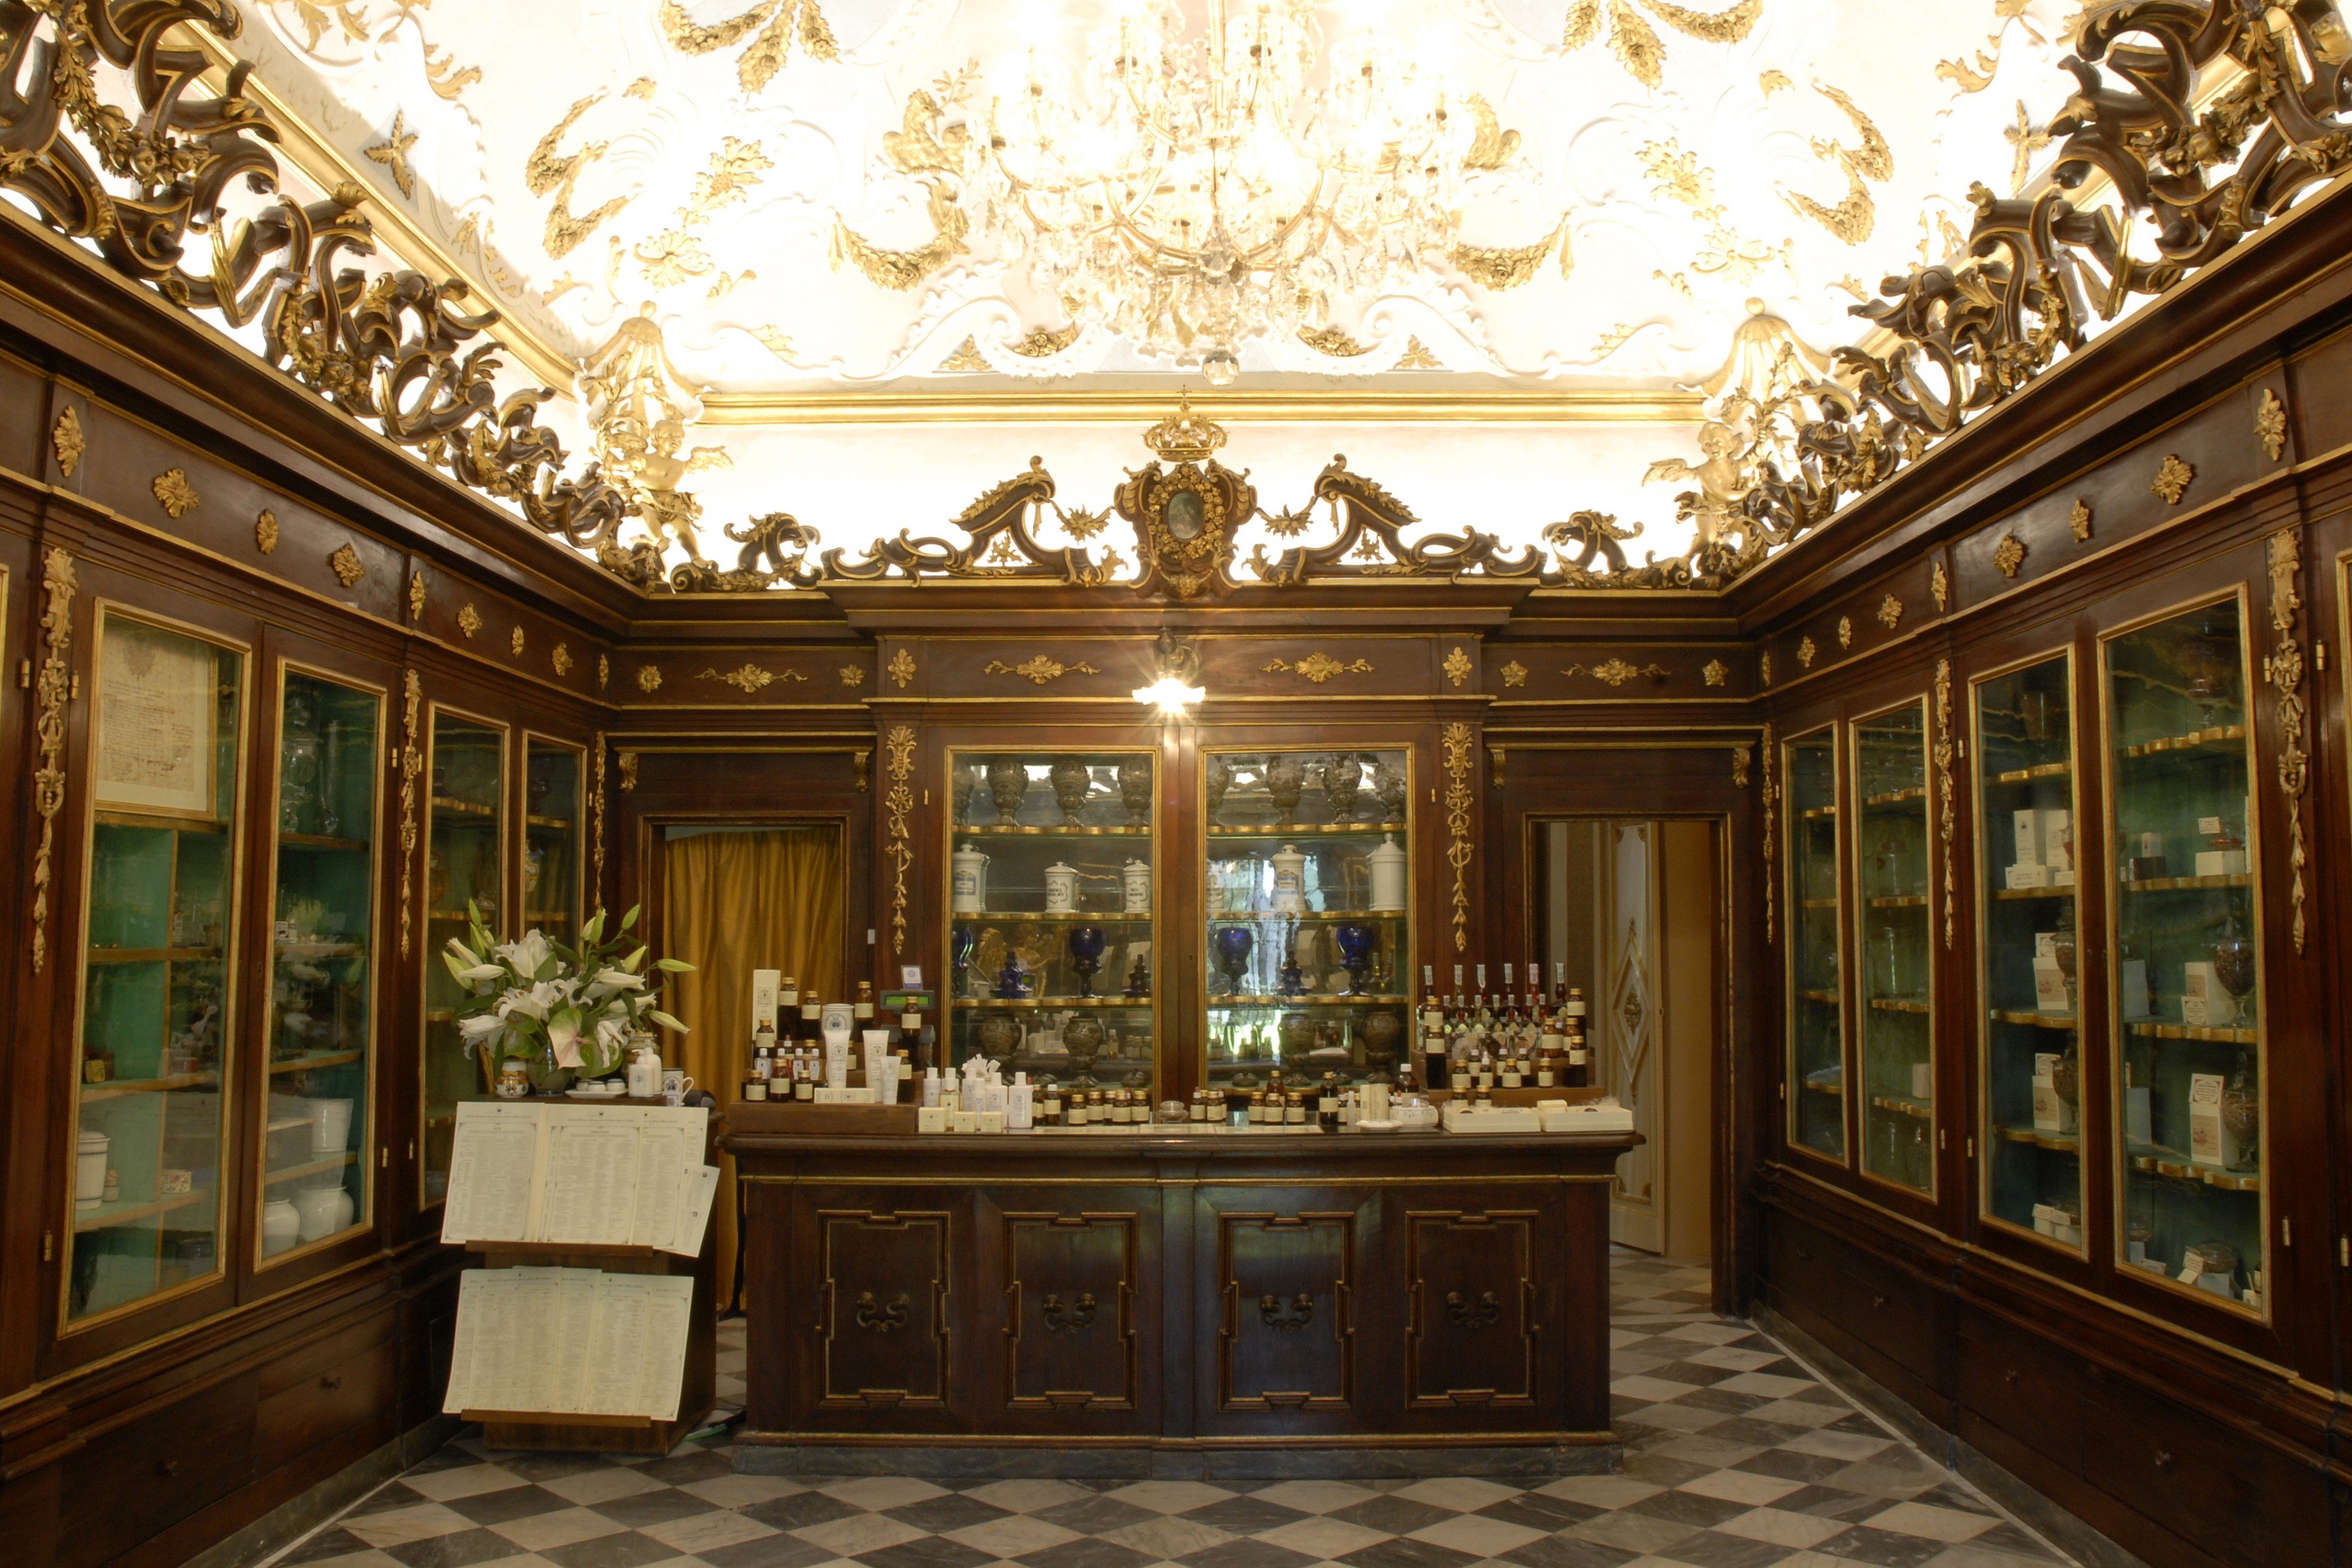 Officina Profumo-Farmaceutica di Santa Maria Novella is one of the oldest pharmacies in the world, founded by Dominican monks in 1221 .